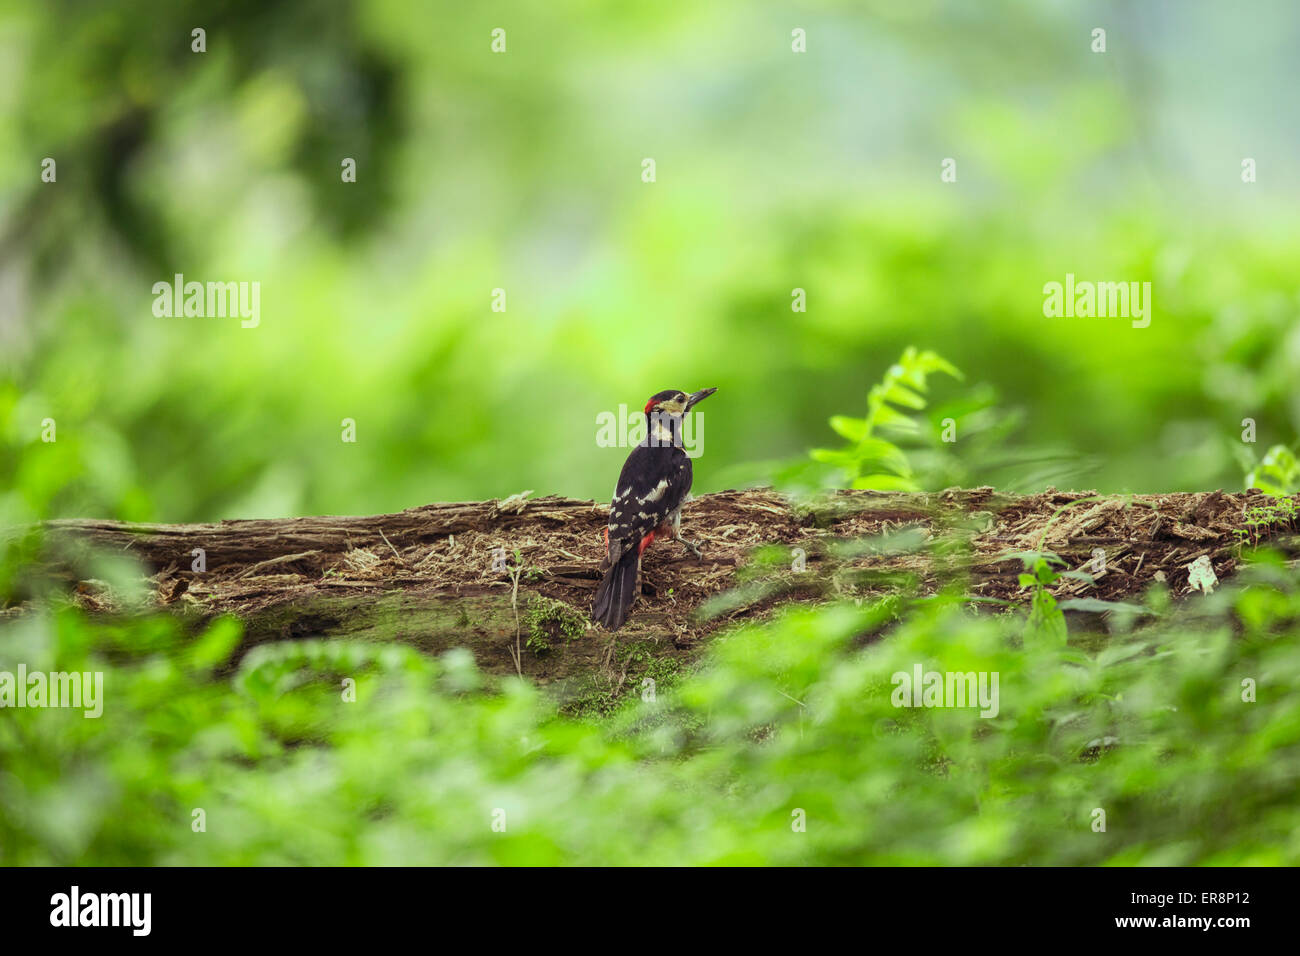 A Great spotted woodpecker ( Dendrocopos major ) perchs on the branch of a tree in Wuyuan county, Jiangxi province, China on 23t Stock Photo